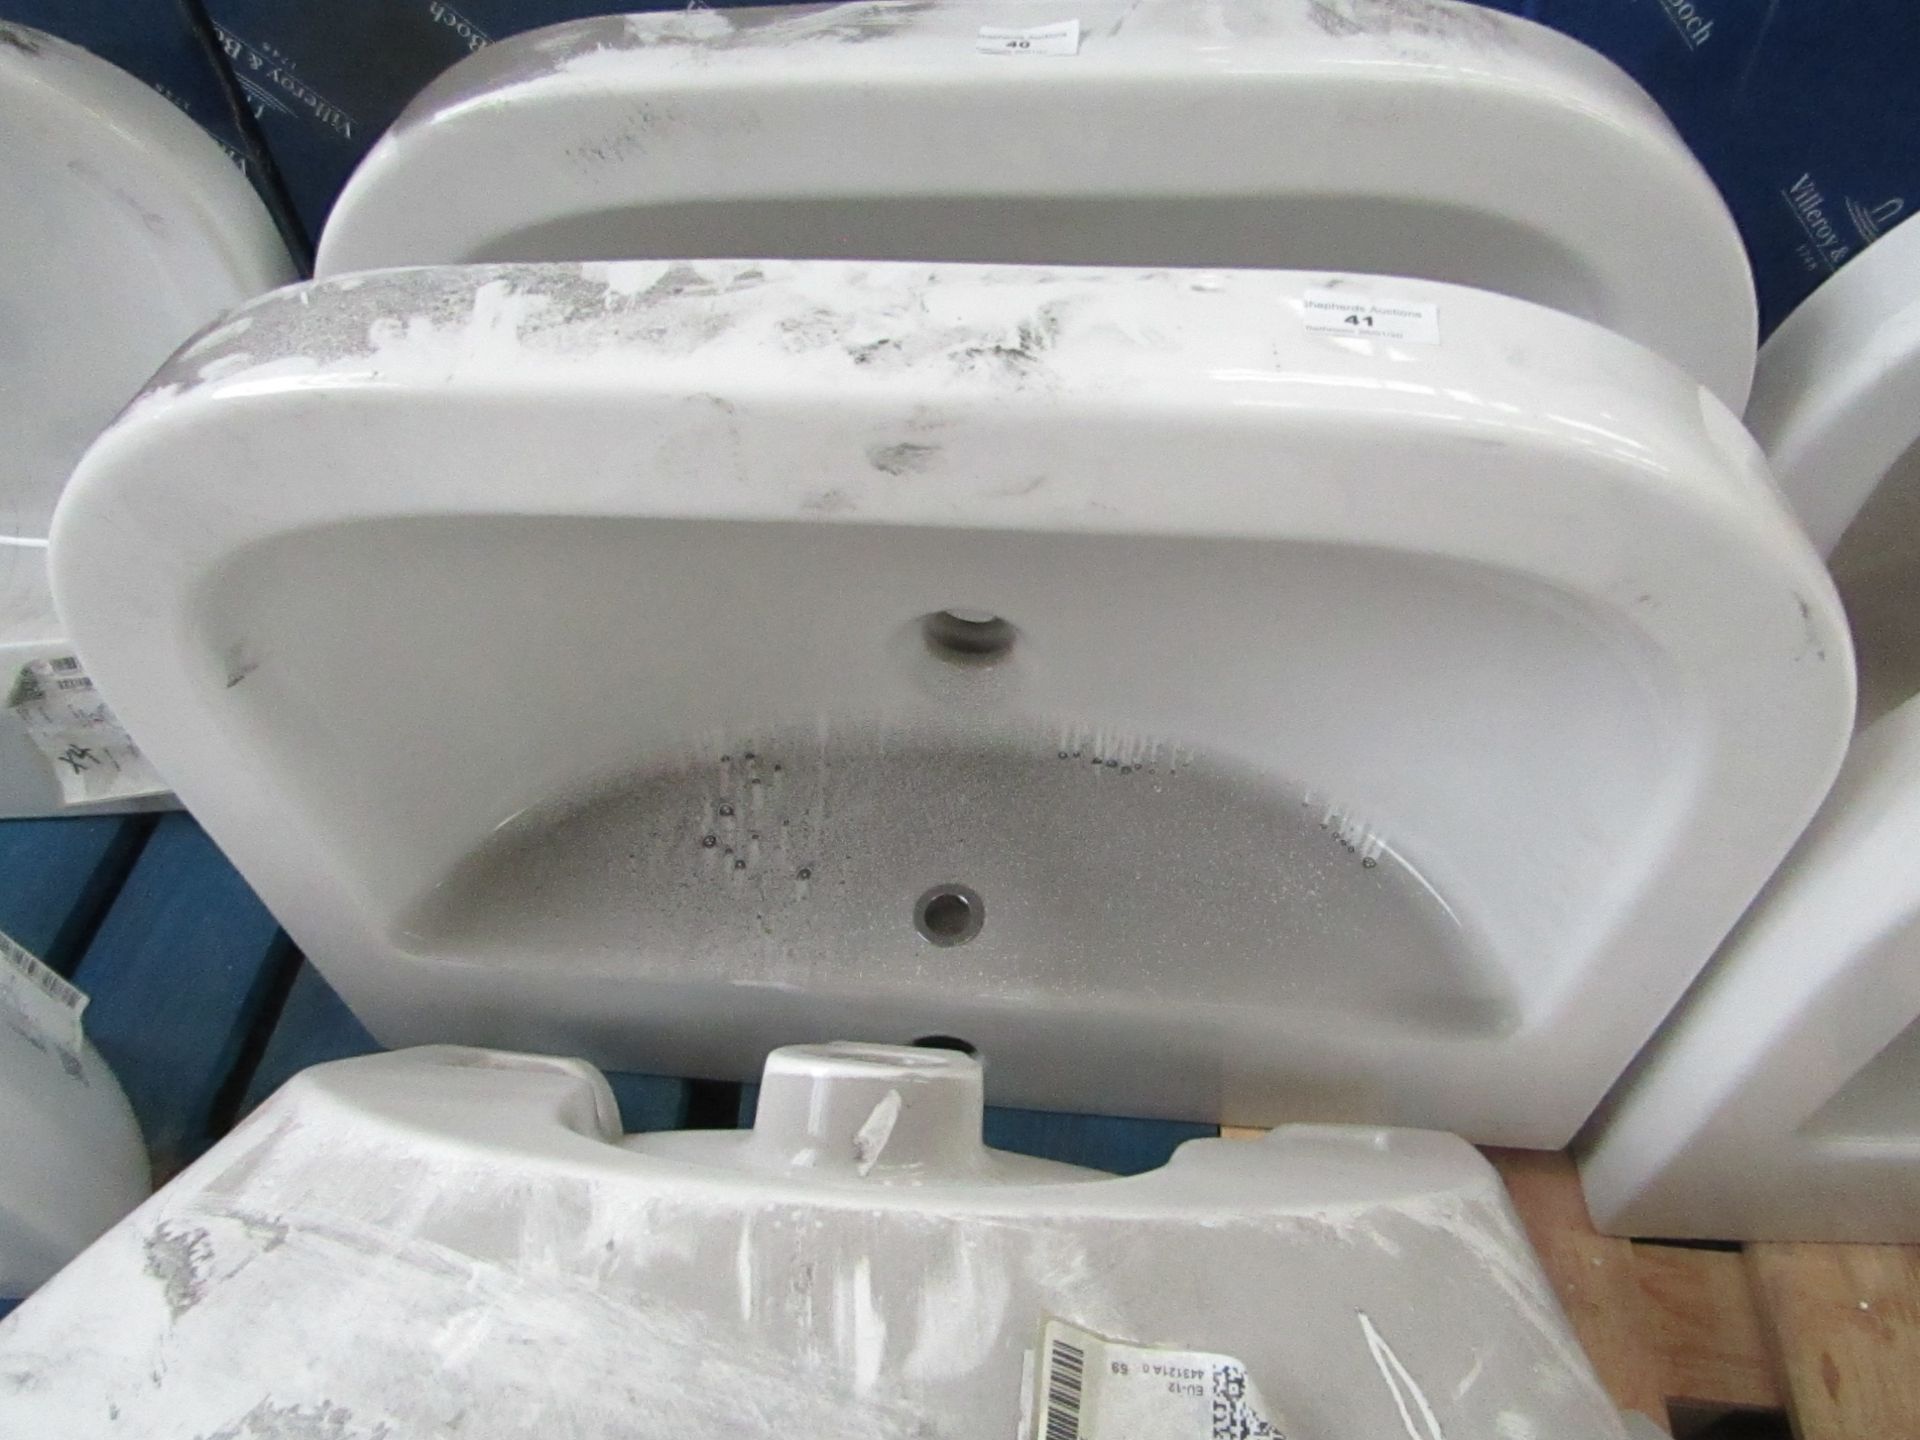 Villeroy and Boch 1TH basin with overflow, 650mm, new.